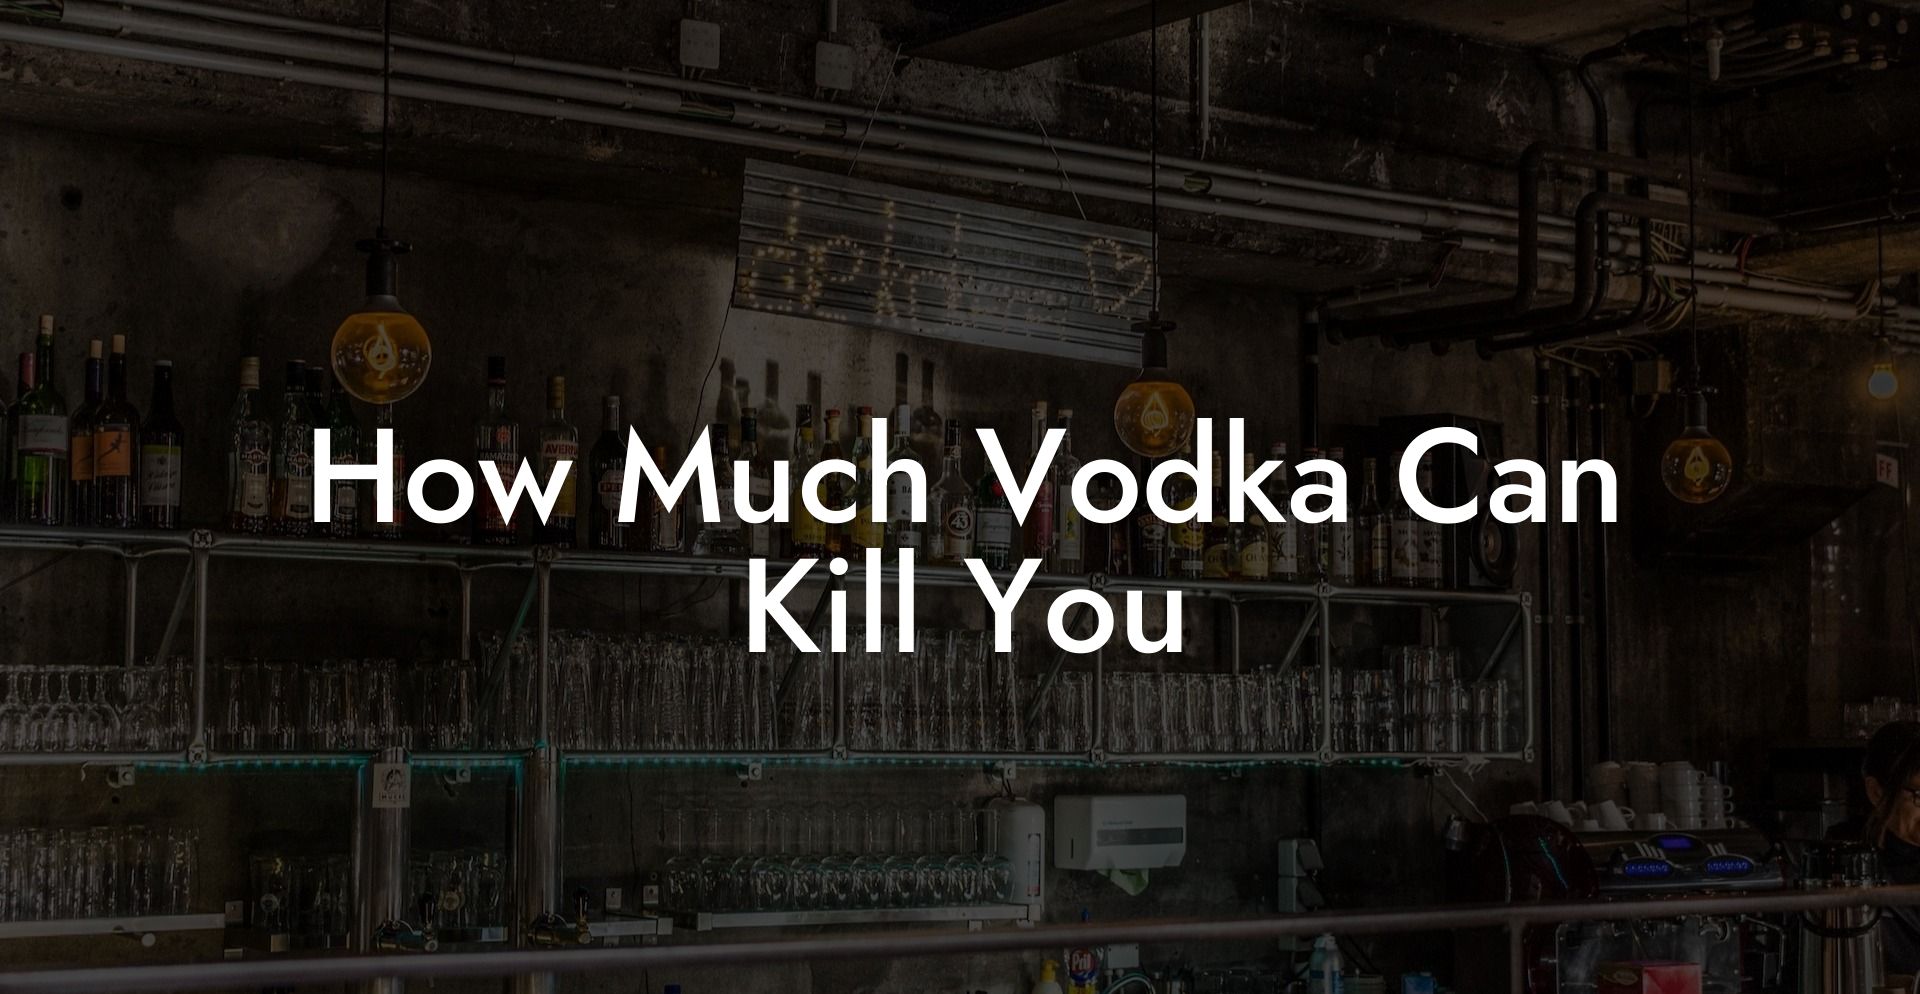 How Much Vodka Can Kill You